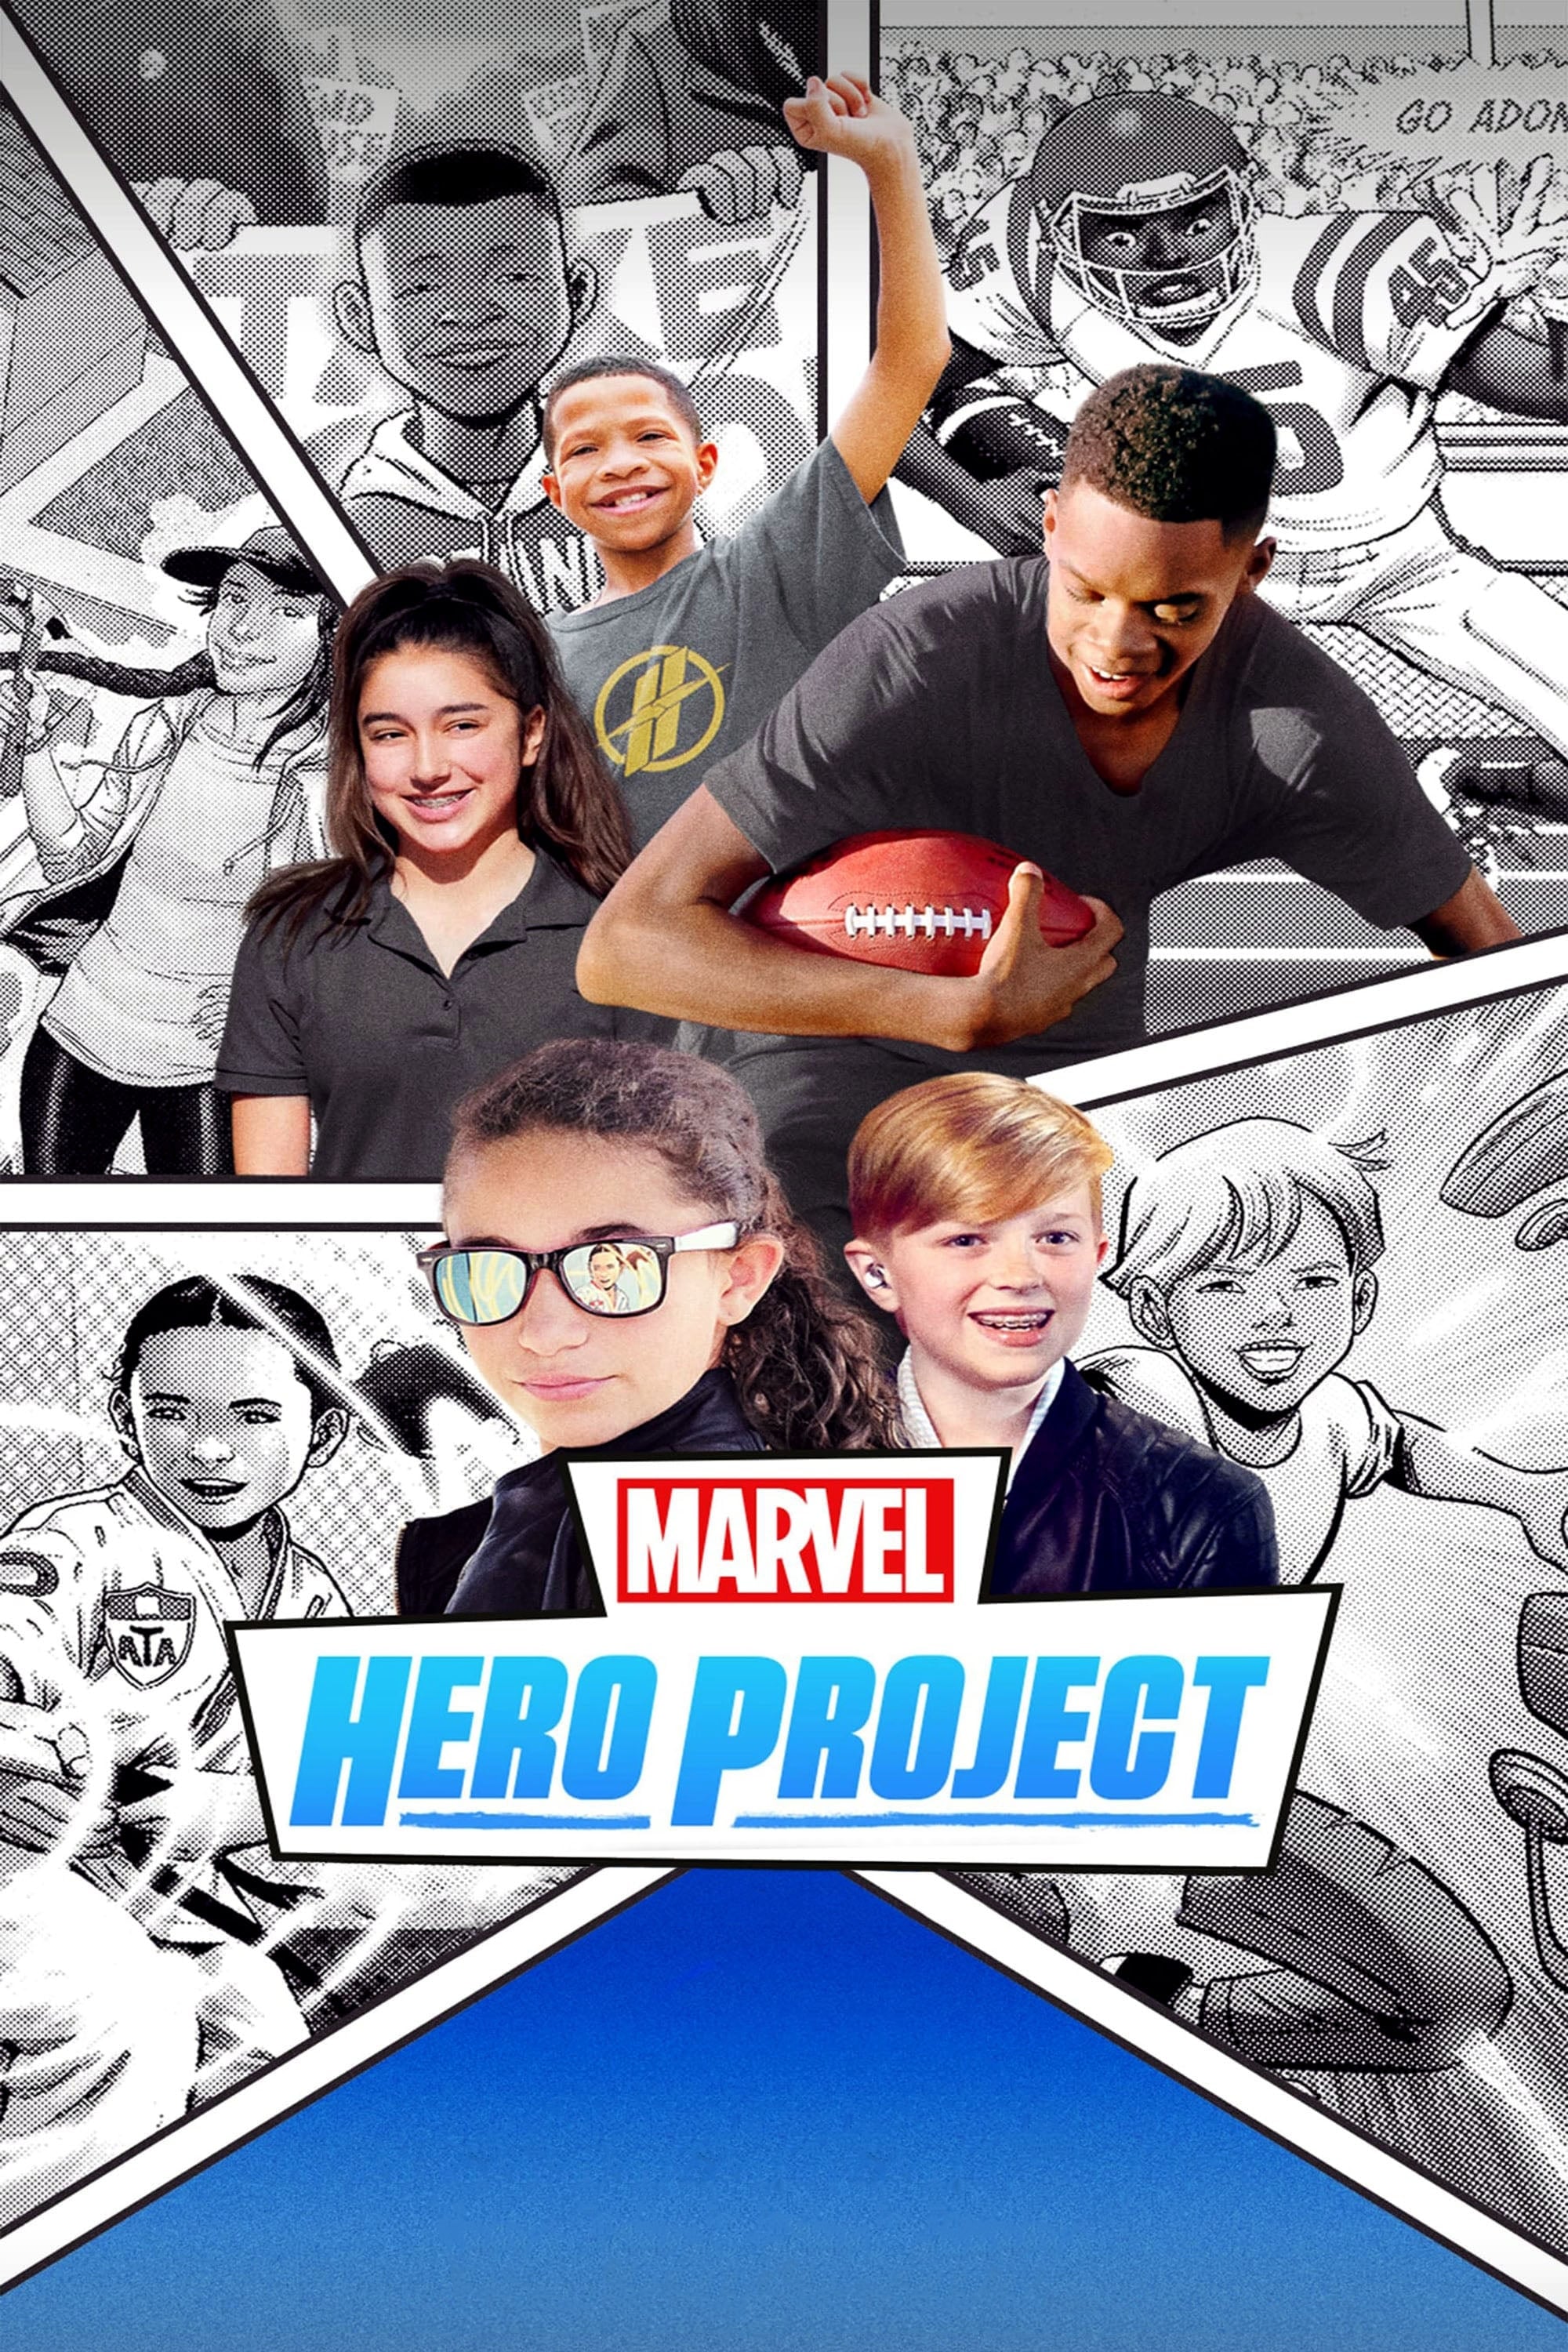 Marvel's Hero Project TV Shows About Kids